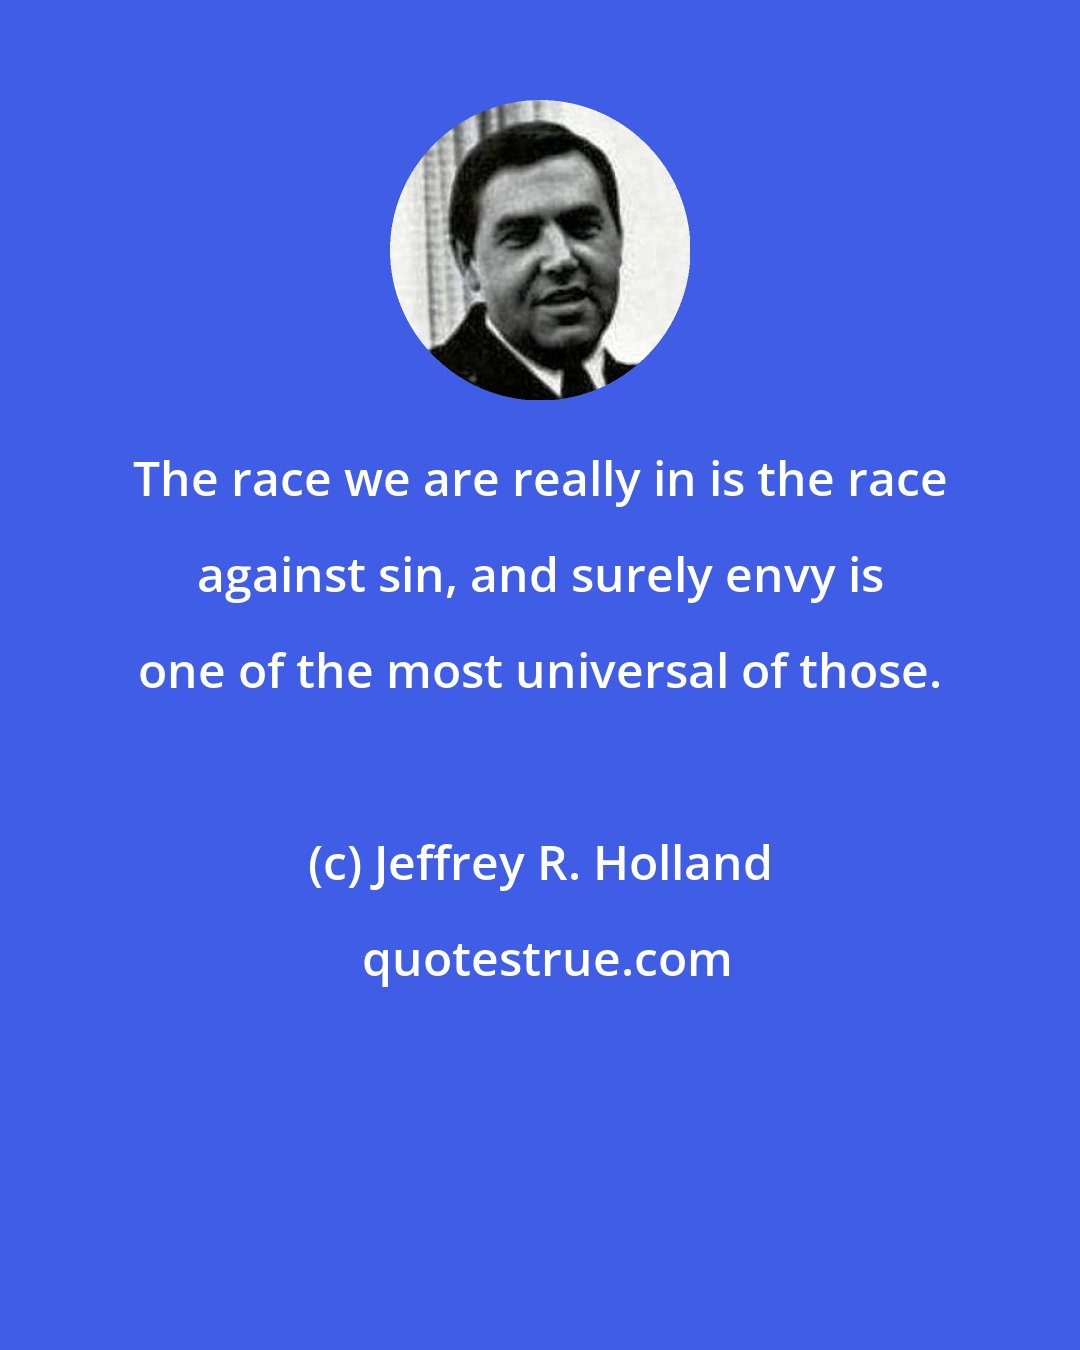 Jeffrey R. Holland: The race we are really in is the race against sin, and surely envy is one of the most universal of those.